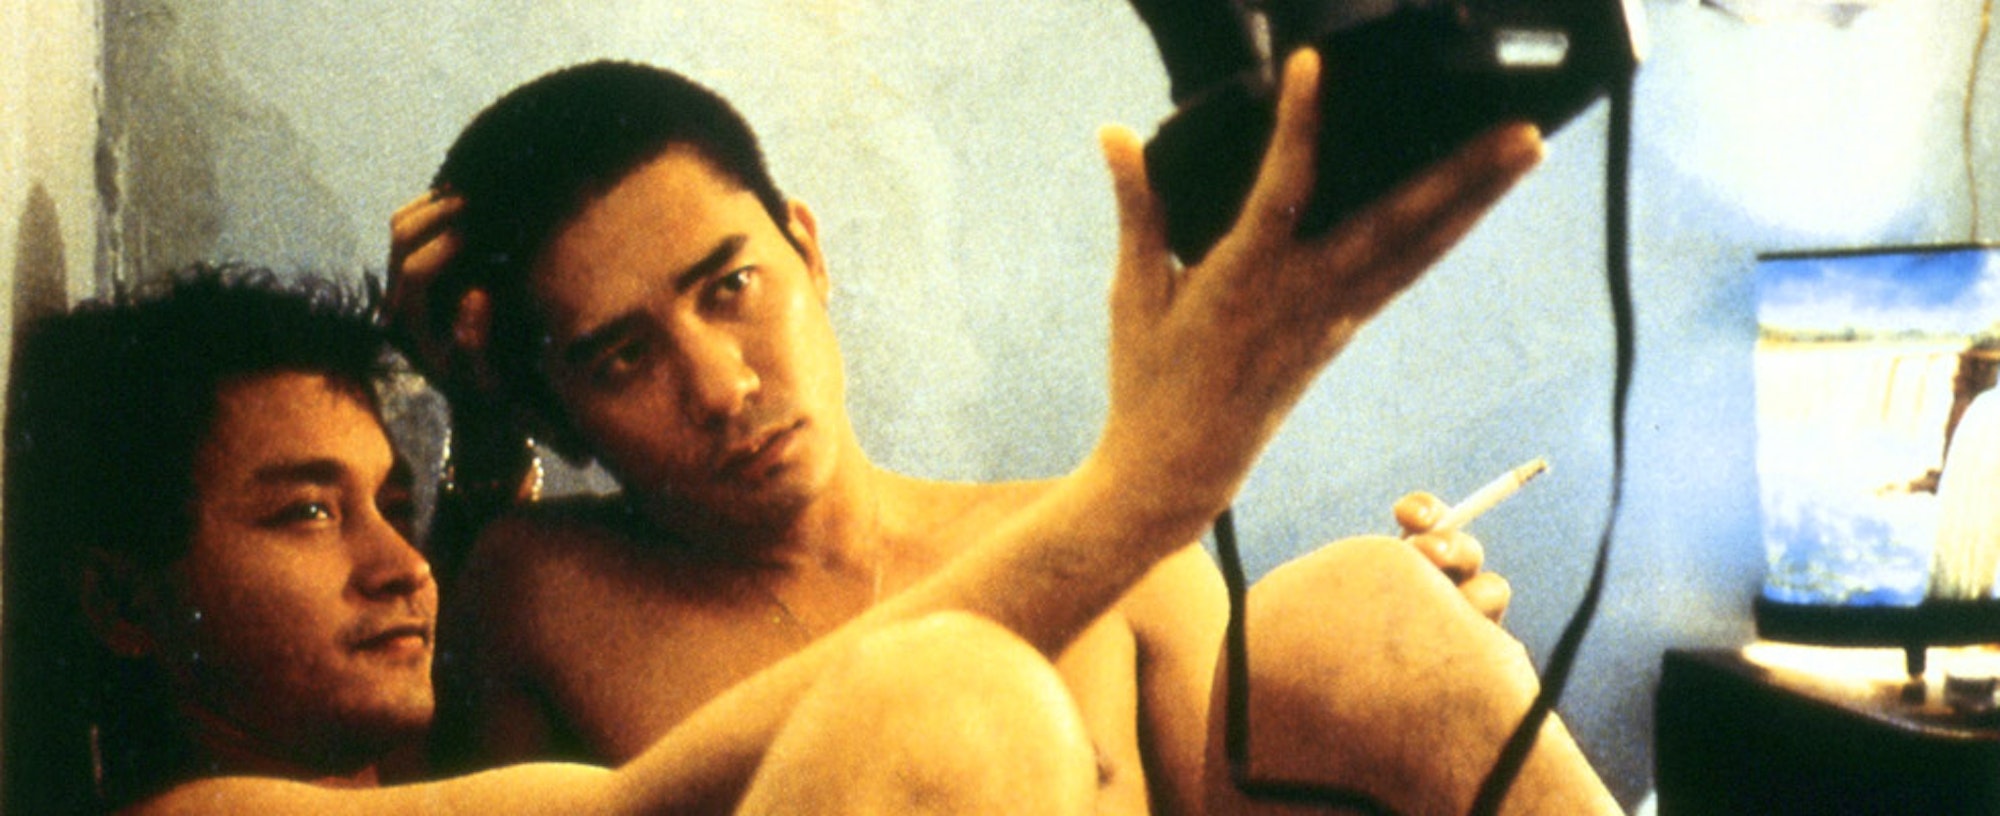 Two shirtless people with short black hair take a selfie with a film camera.